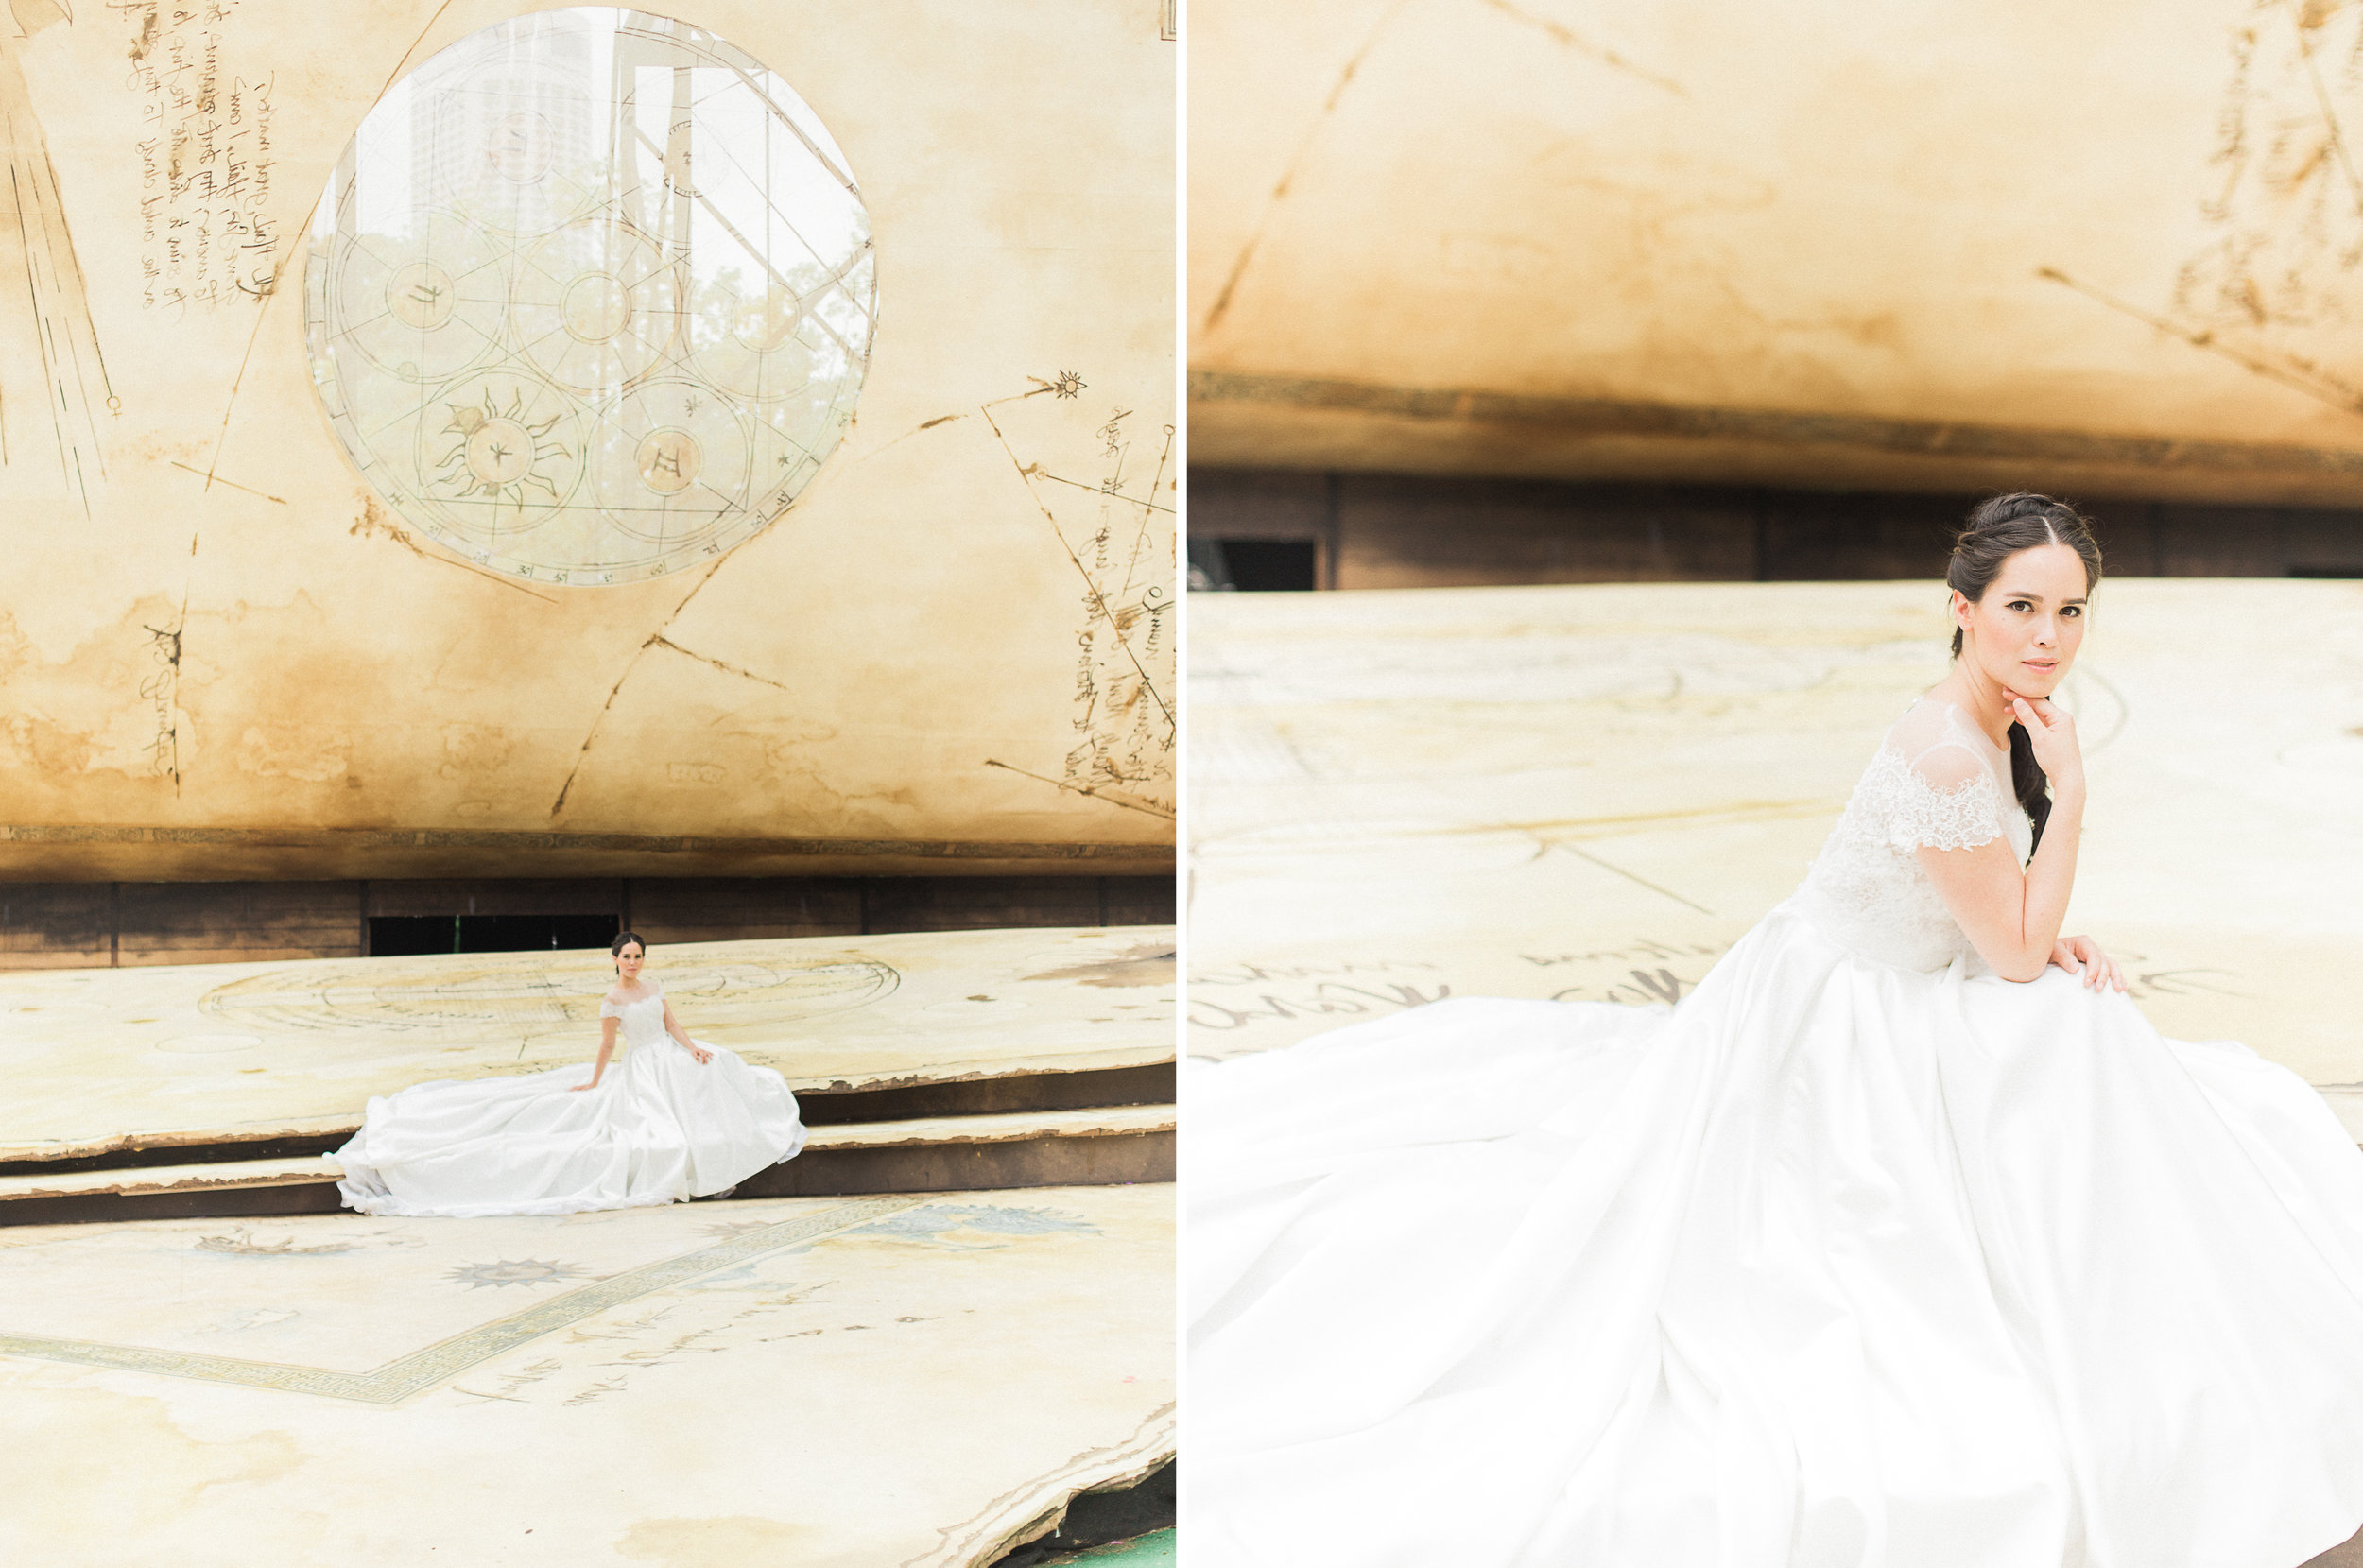 chen sands editorial bridal shoot shakespeare the wedding scoop singapore collage 6.jpg